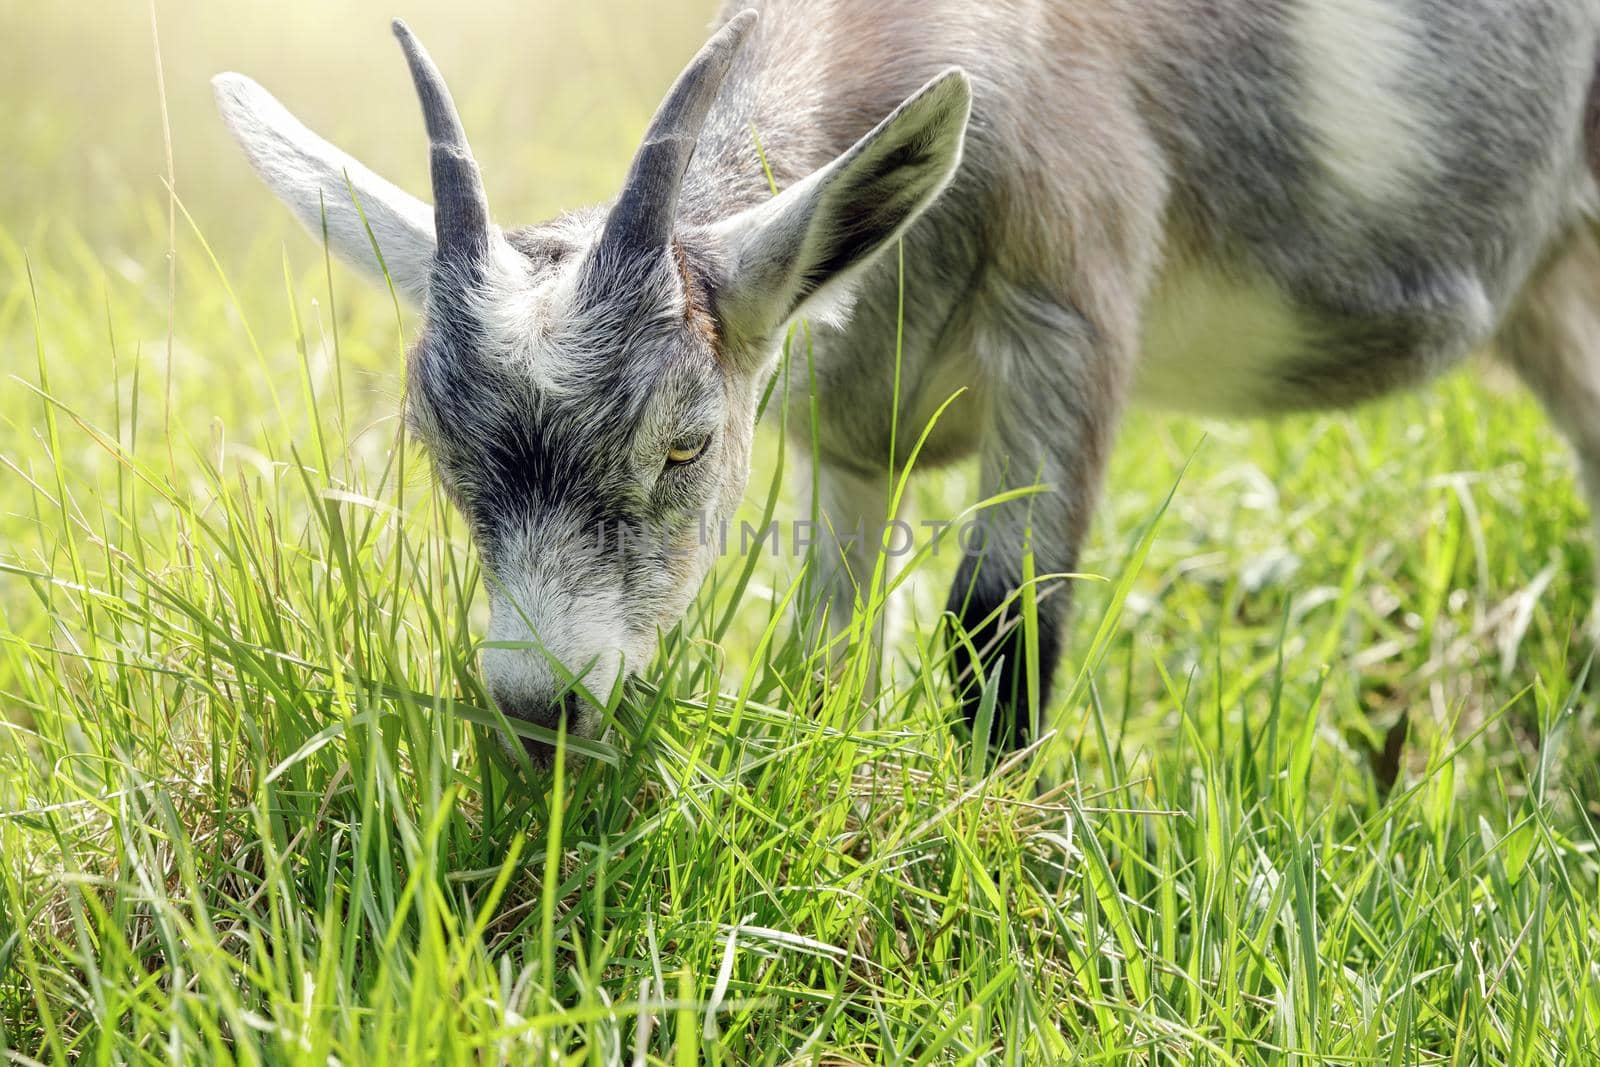 Sunny summer day gray goat with horns eats green grass. Free-range goat grazing on a small rural organic dairy farm.